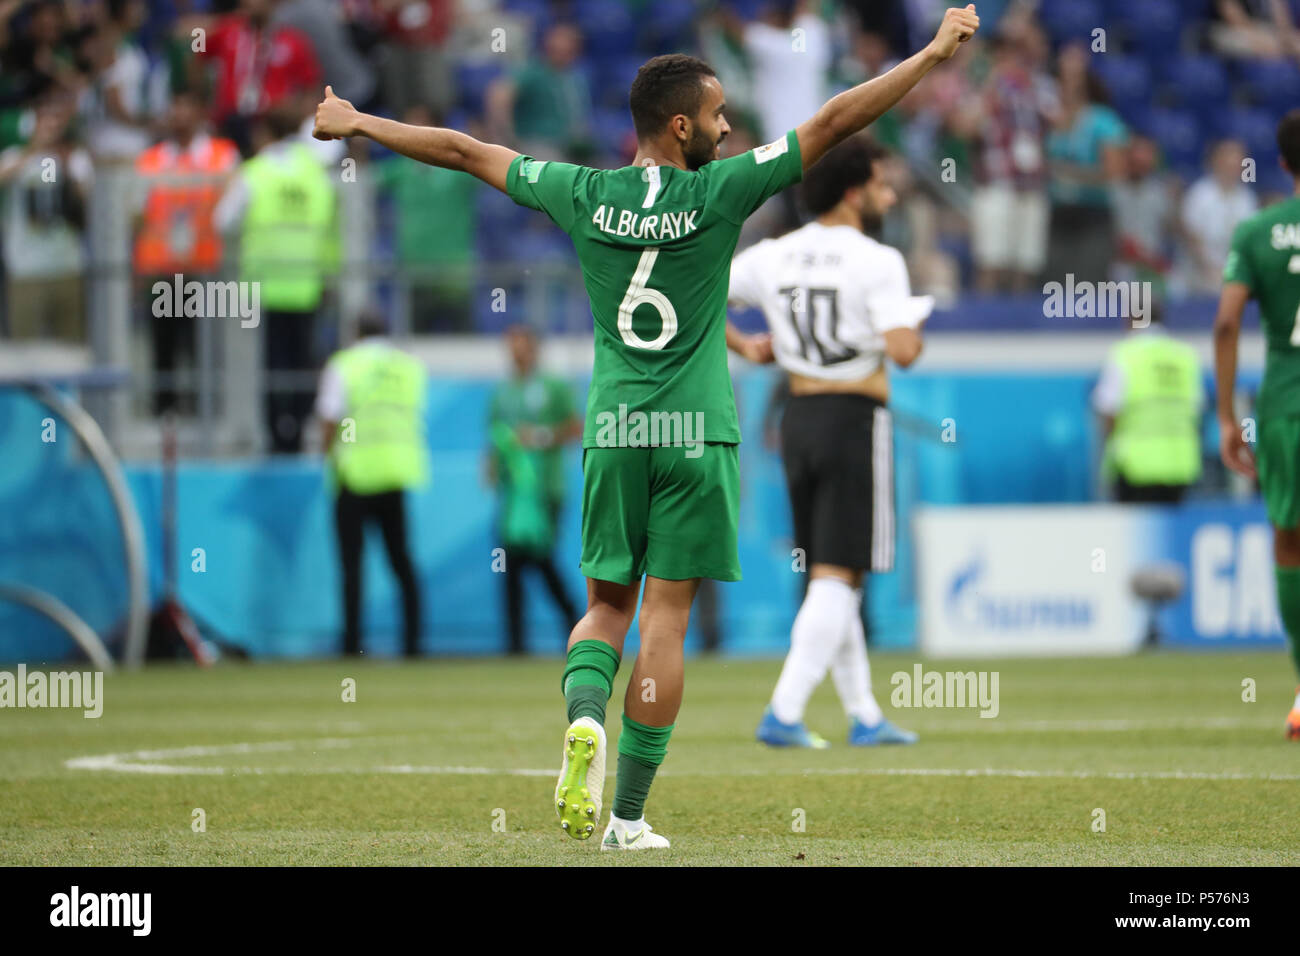 Volgograd, Russia. 25th June, 2018. Saudi Arabia's Mohammed Al-Breik celebrates victory after the end of the FIFA World Cup 2018 Group A soccer match between Saudi Arabia and Egypt at the Volgograd Arena in Volgograd, Russia, 25 June 2018. Credit: Ahmed Ramadan/dpa/Alamy Live News Stock Photo